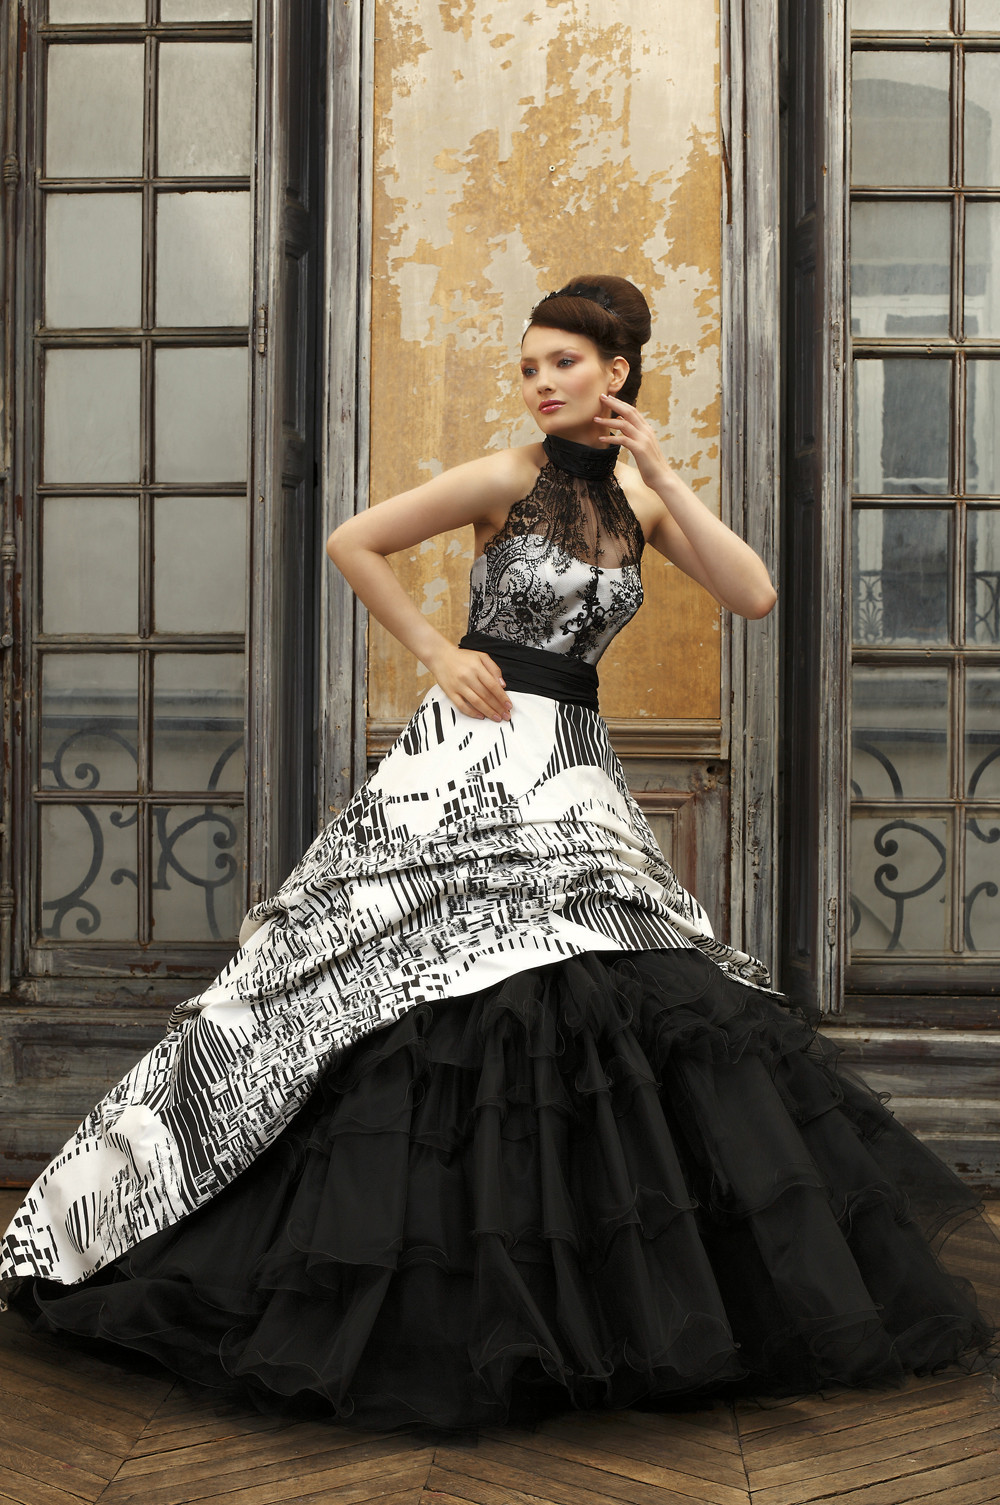 Black Dress To Wedding
 The y and Sophisticated Touches on Black Wedding Gowns